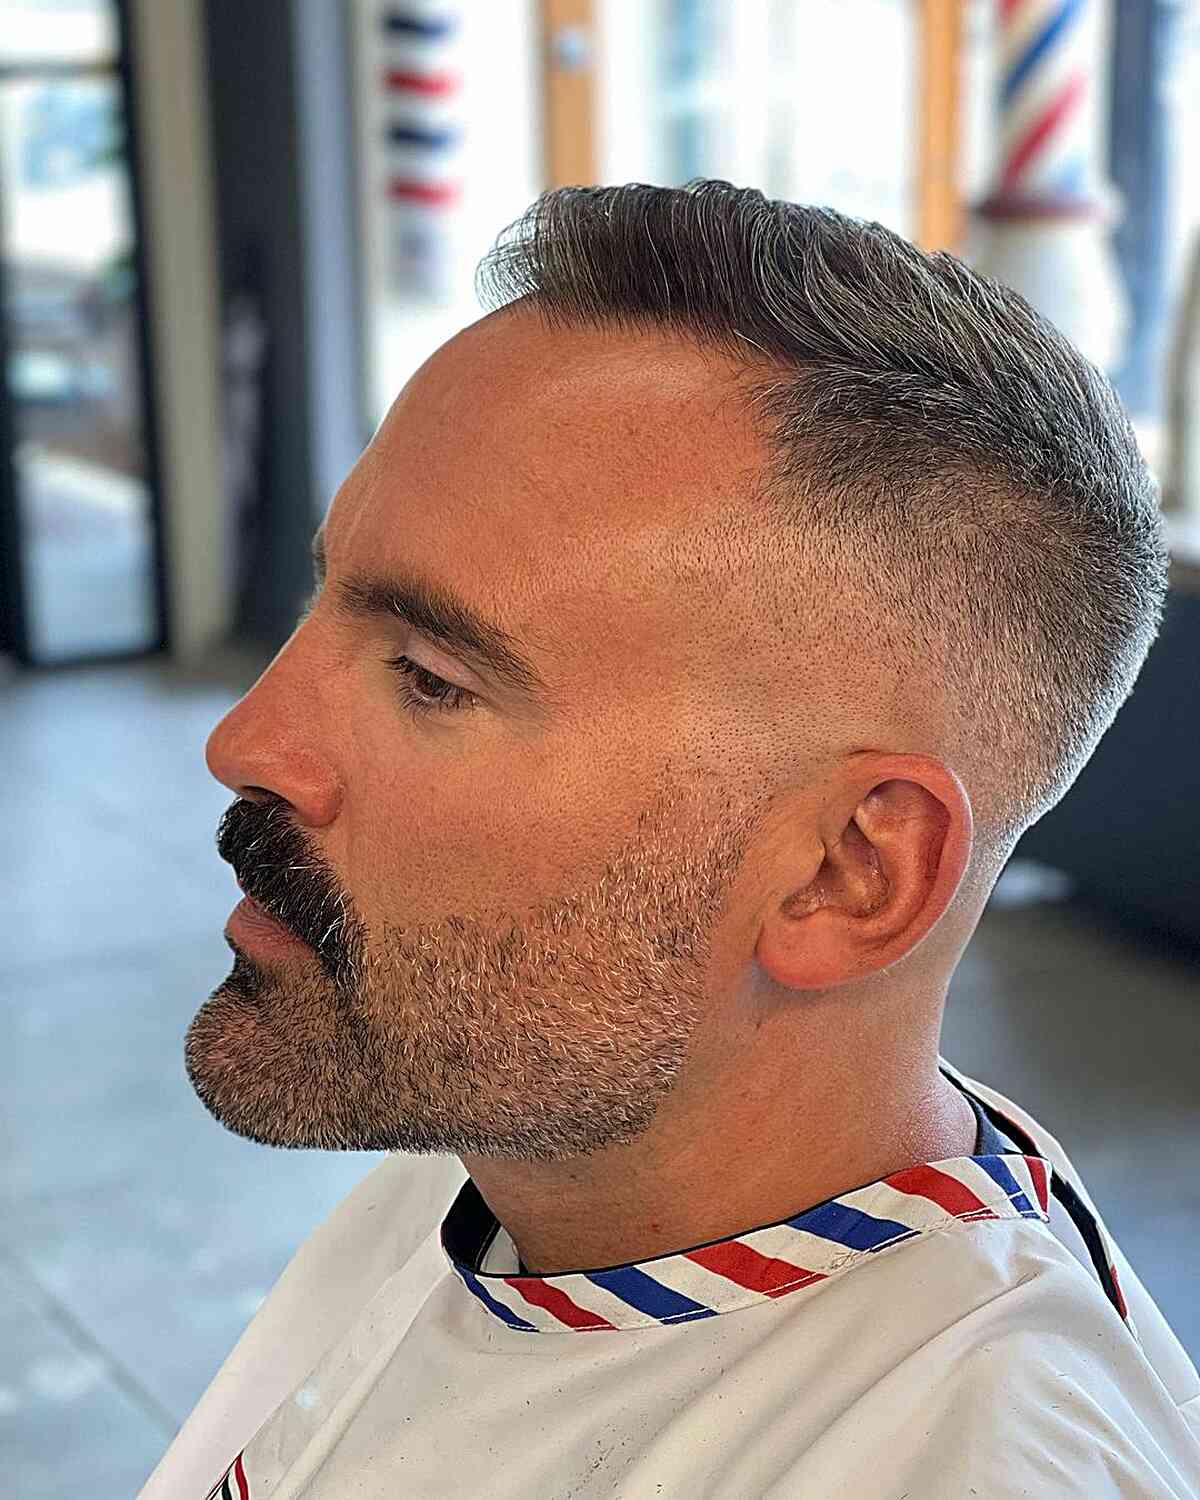 Mid-Skin Fade Combed Forward for Guys Over 40